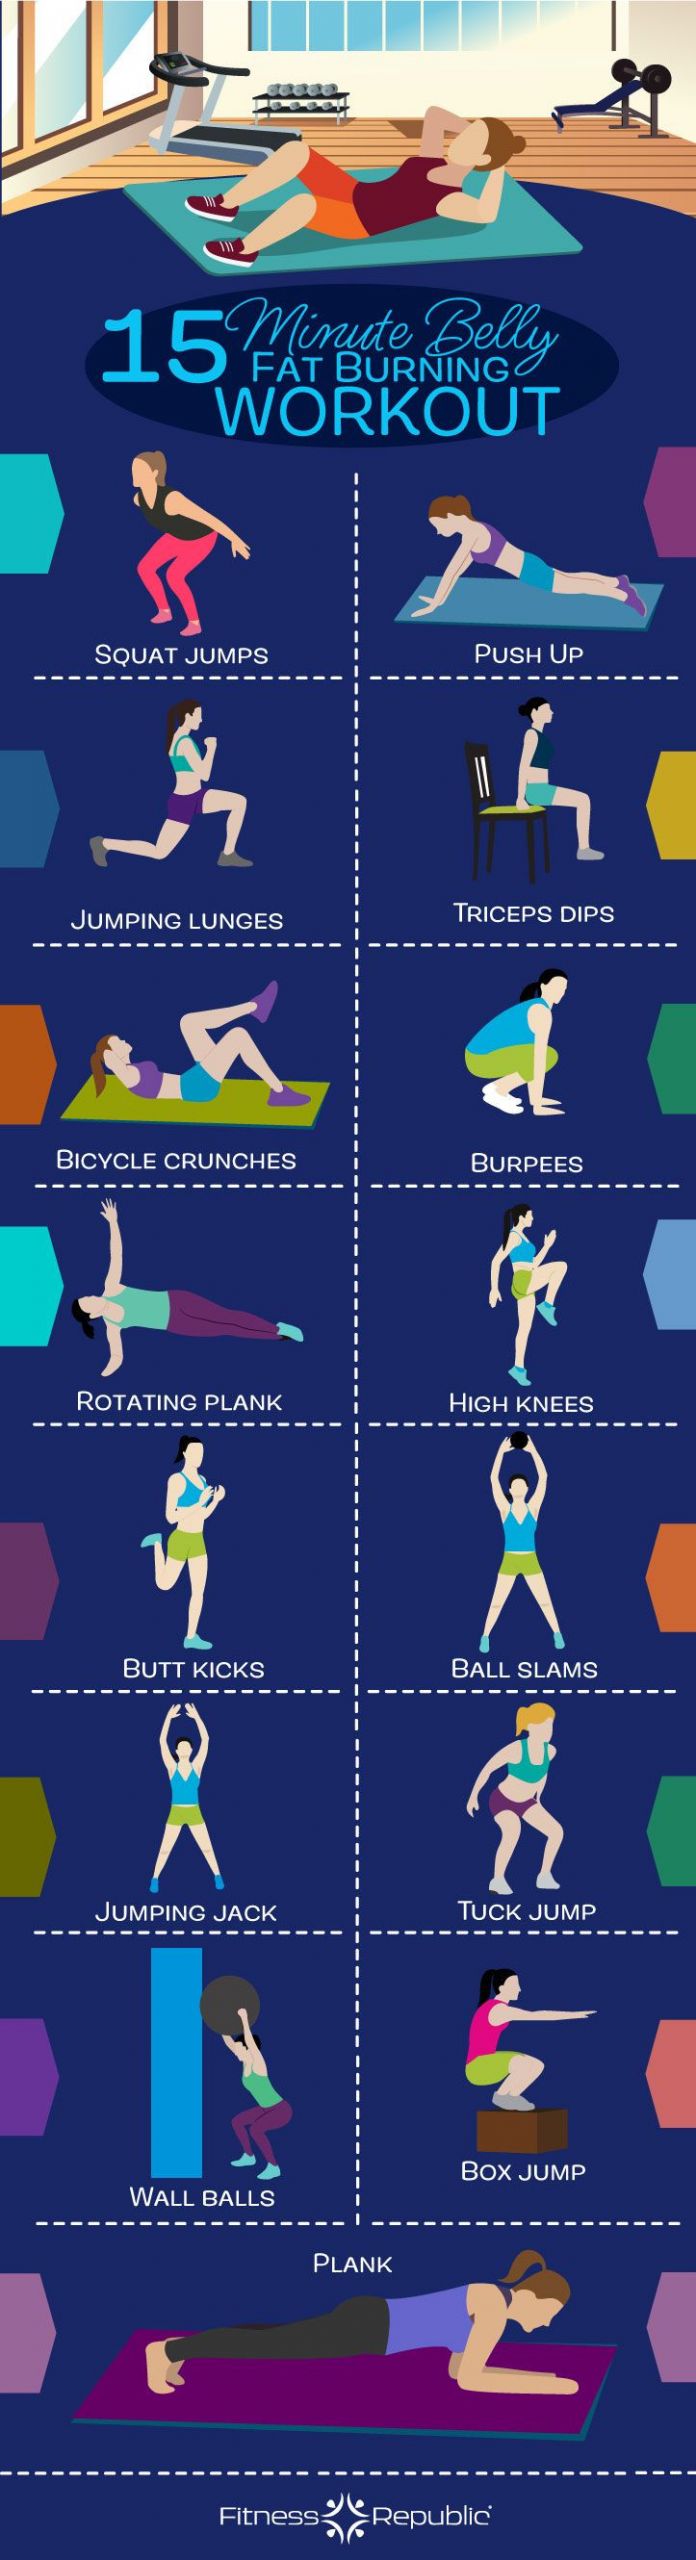 Fast Fat Burning Workout
 Pin on Fit life